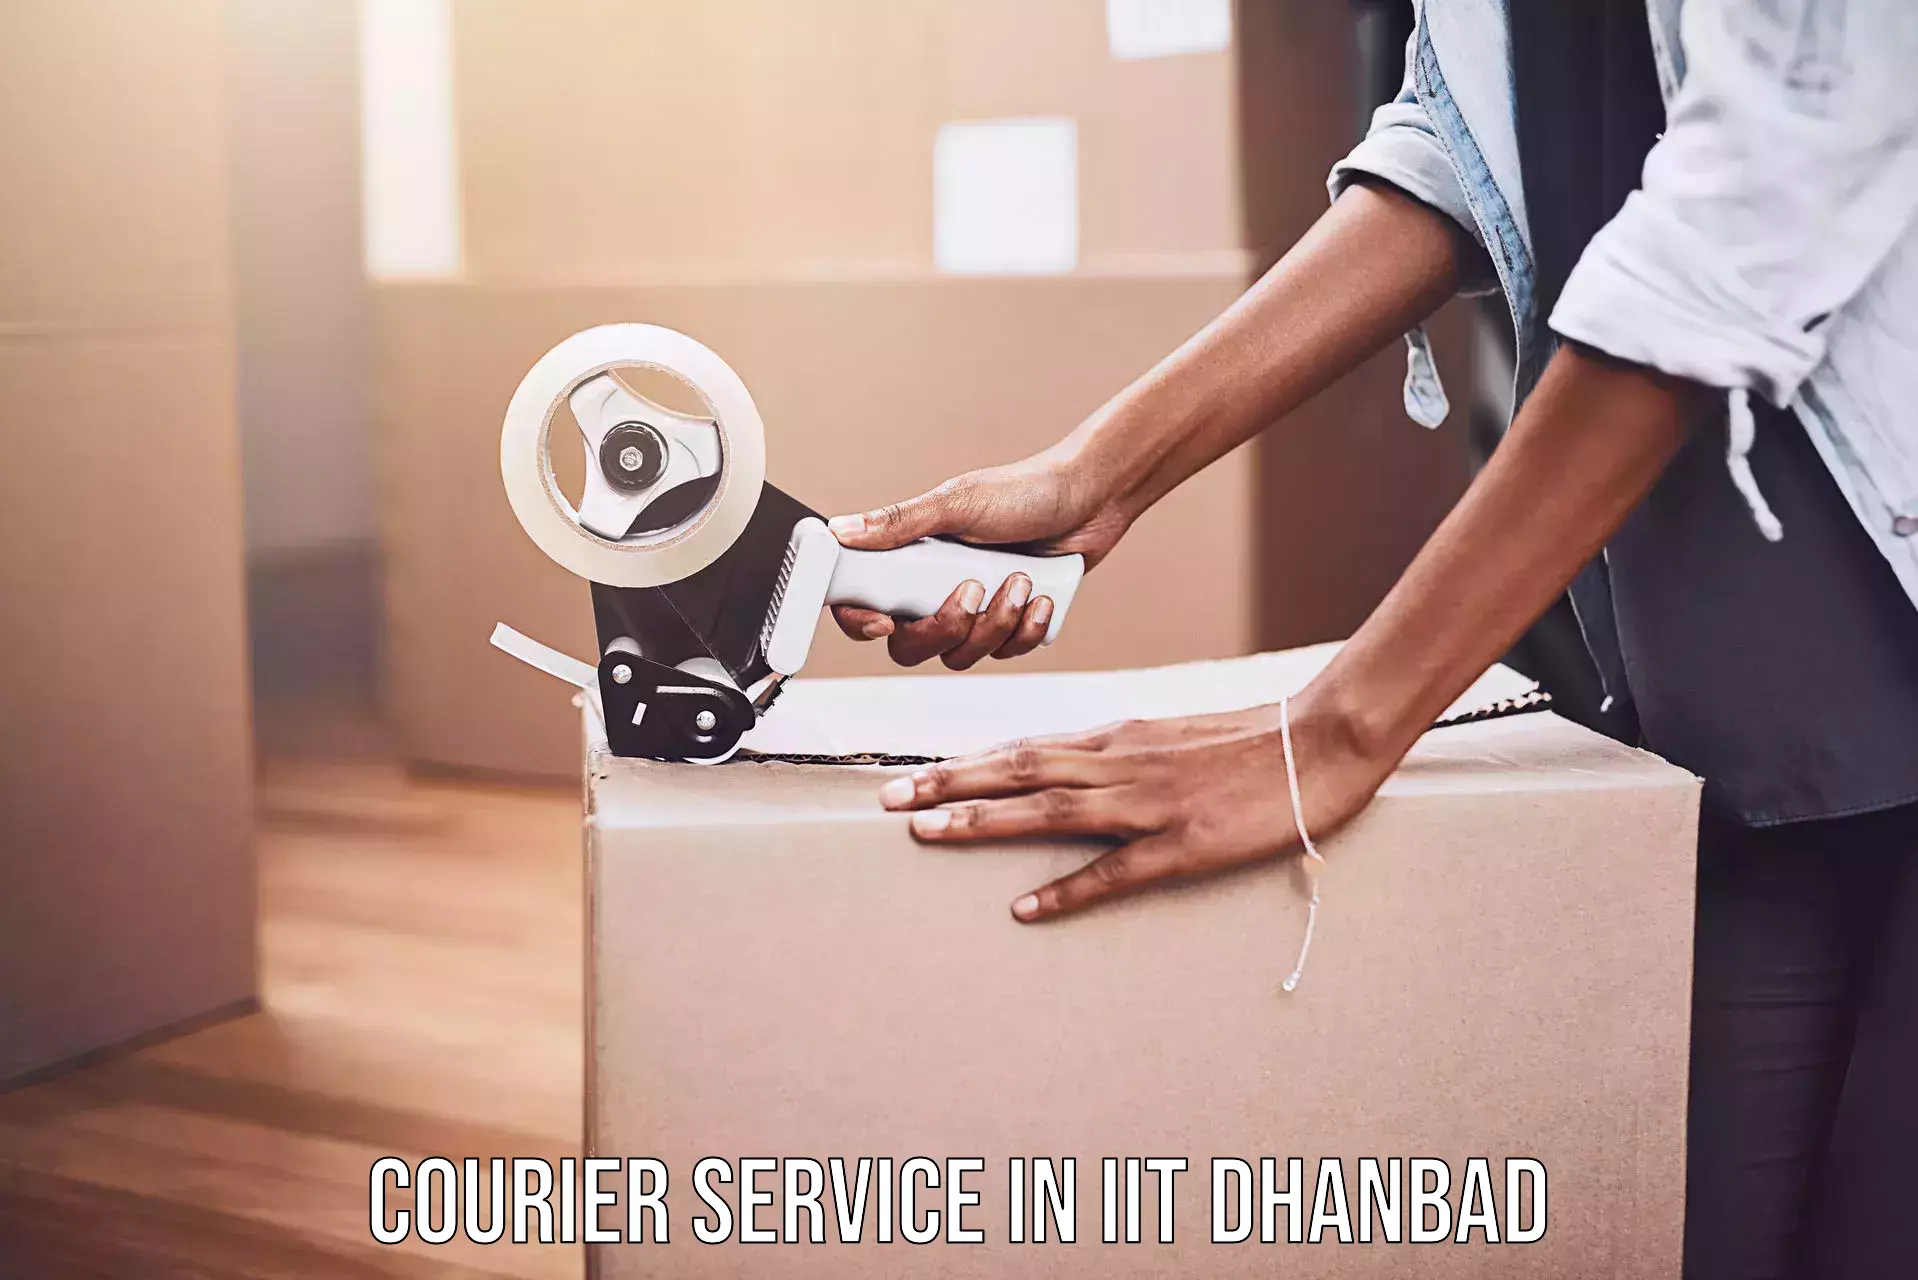 On-call courier service in IIT Dhanbad